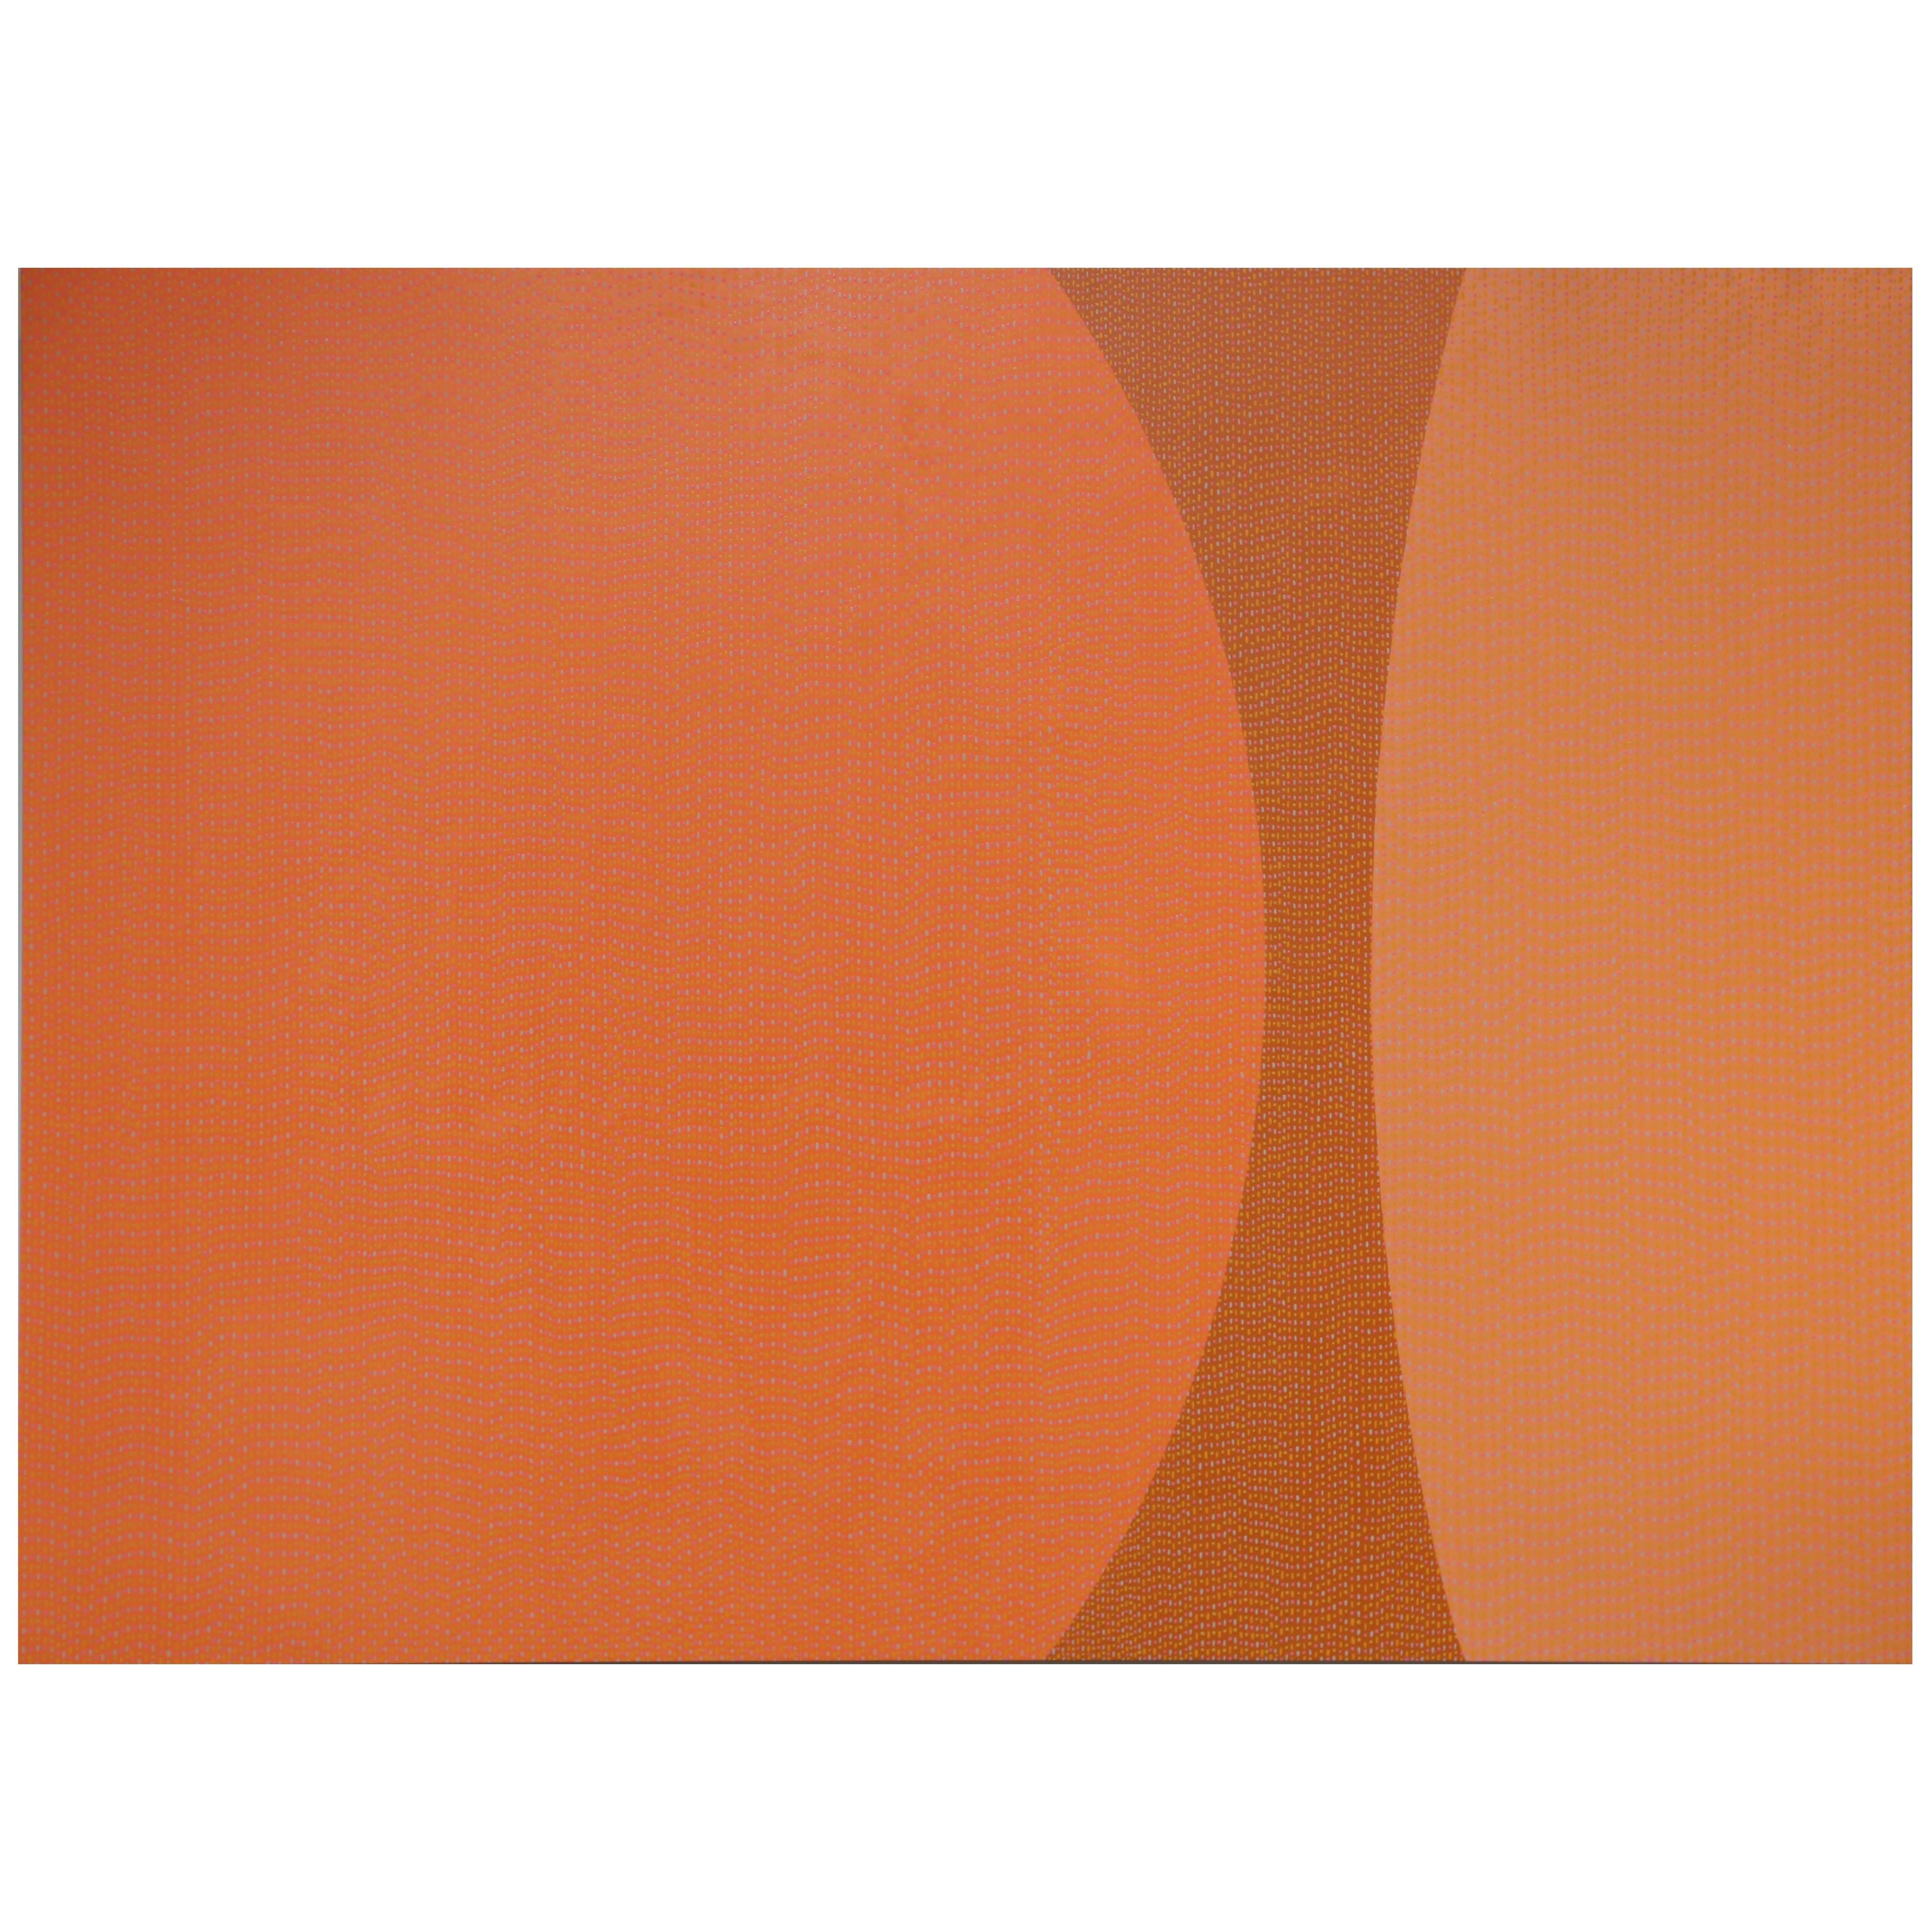 Pointillism Orange Enamel Painting on Aluminum Sheet by James Goodwill For Sale